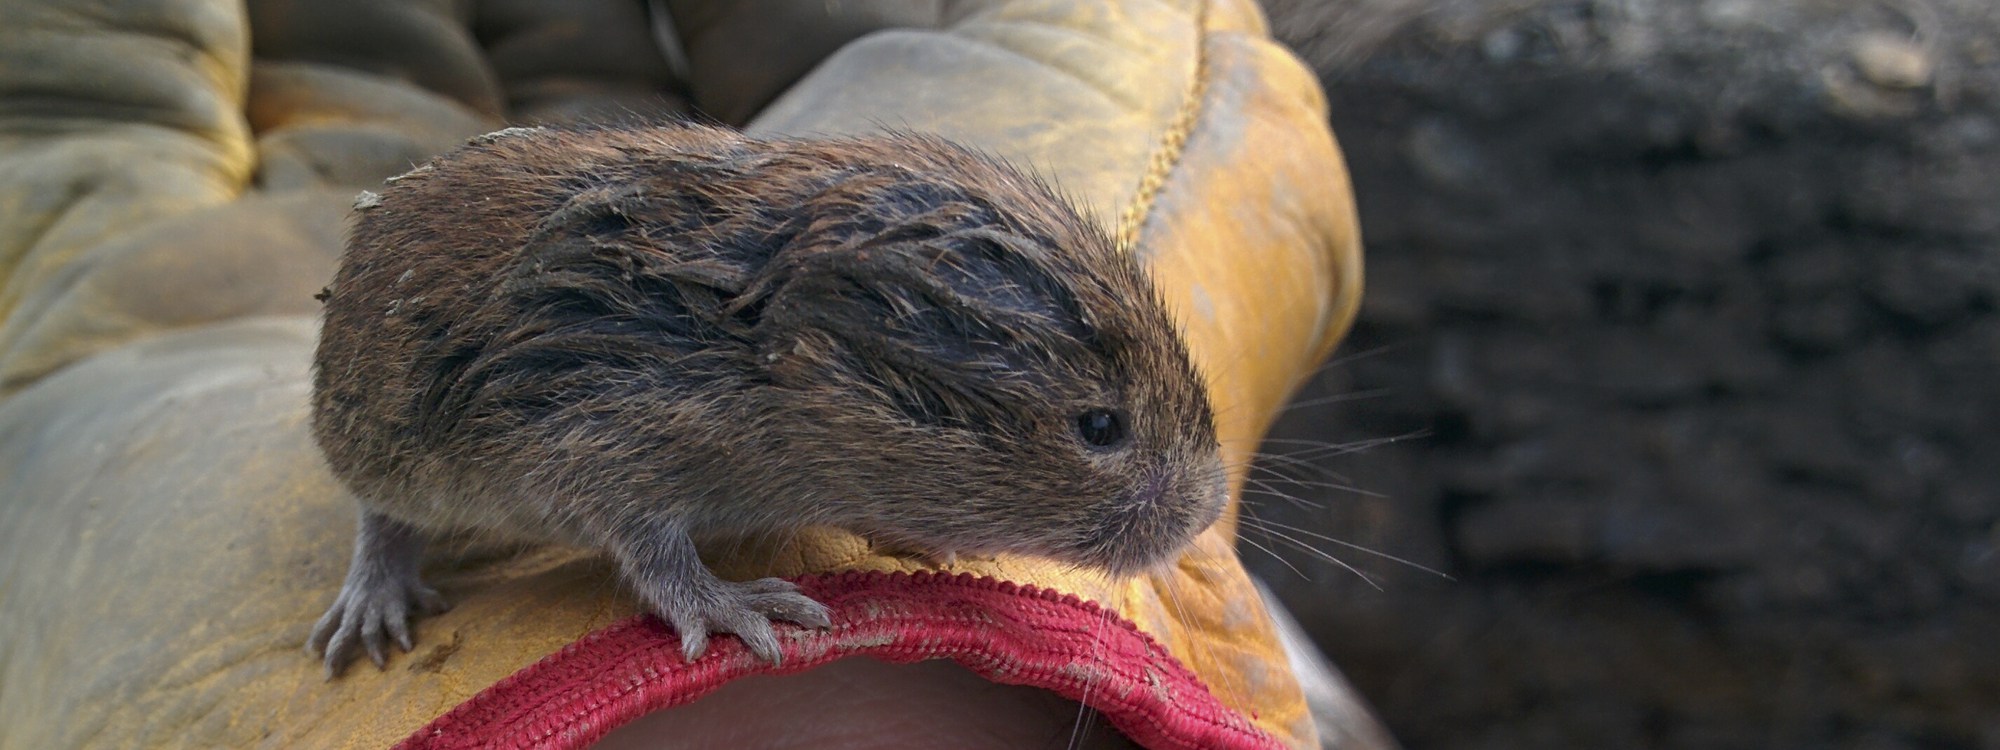 Photo of a little fieldmouse I found while helping the neighbouring farmers organize some tarps.